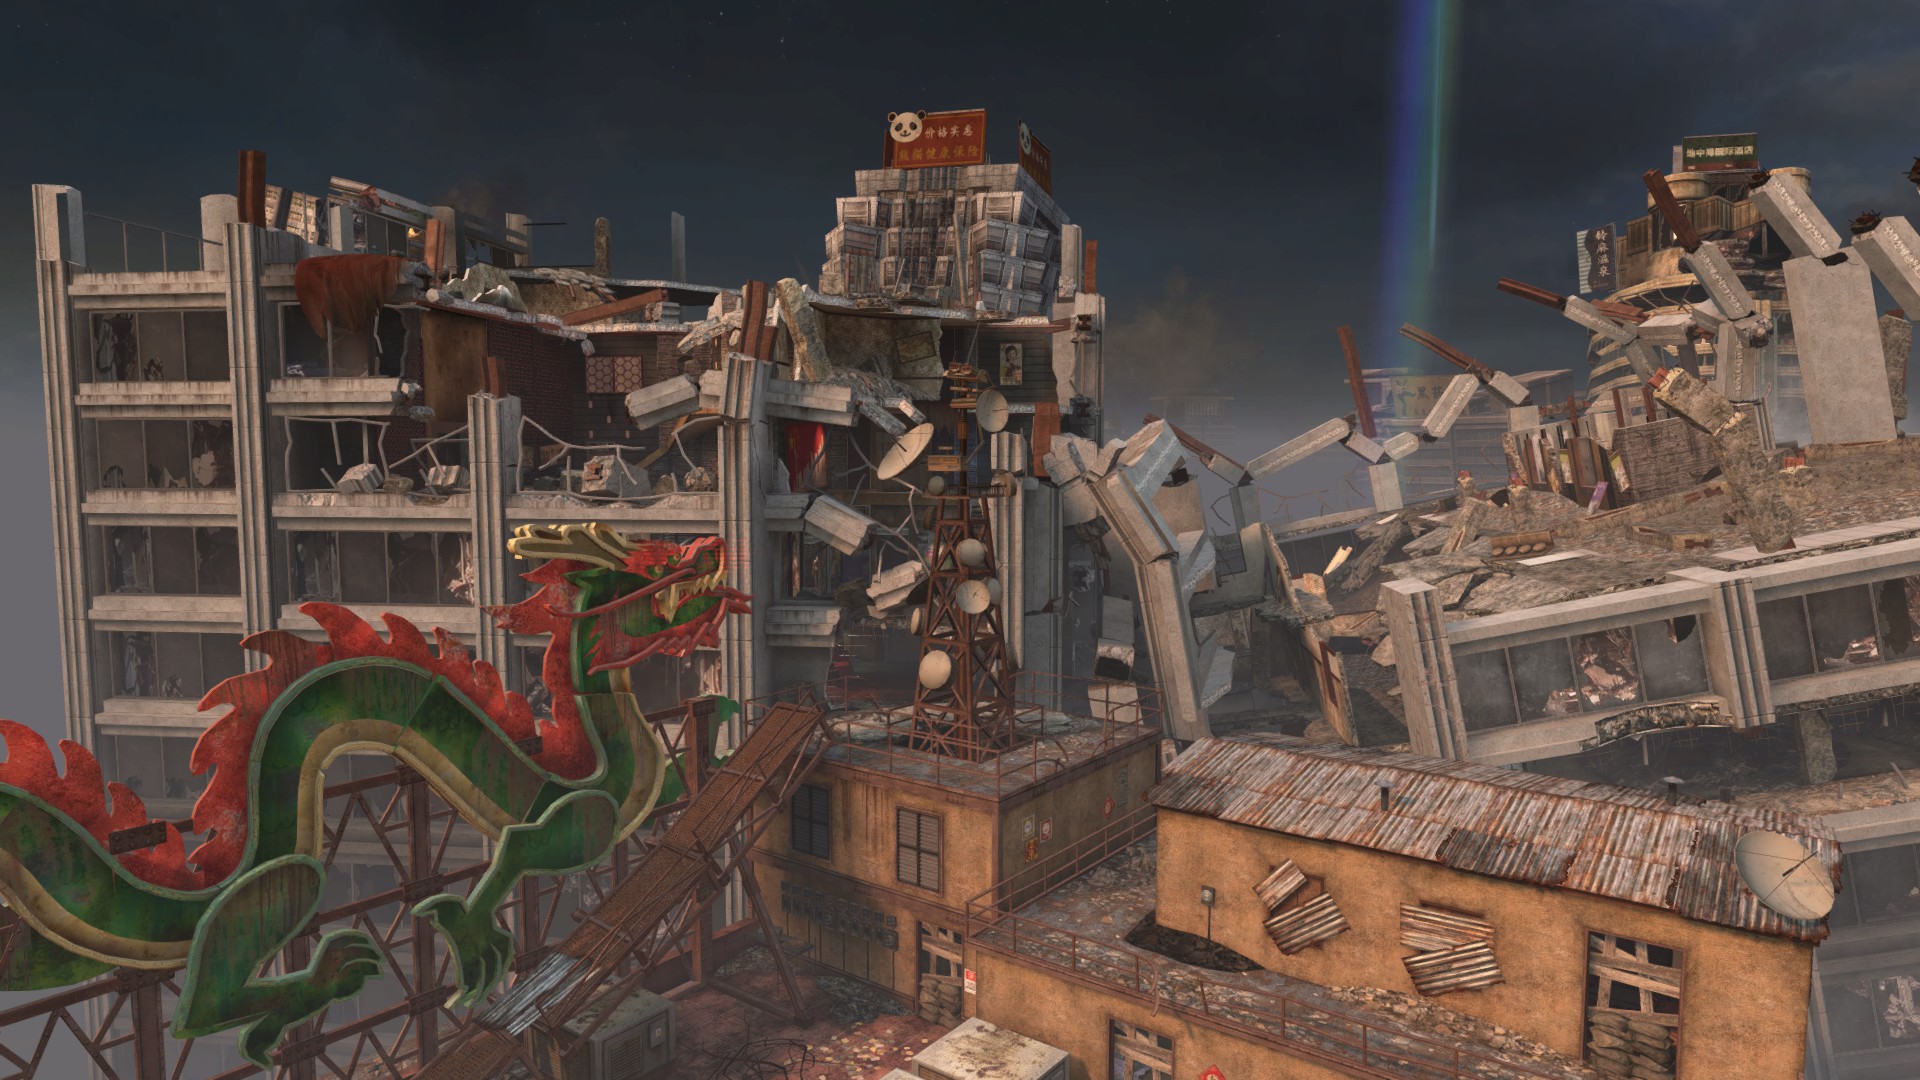 image-die-rise-map-zombies-boii-jpg-the-call-of-duty-wiki-black